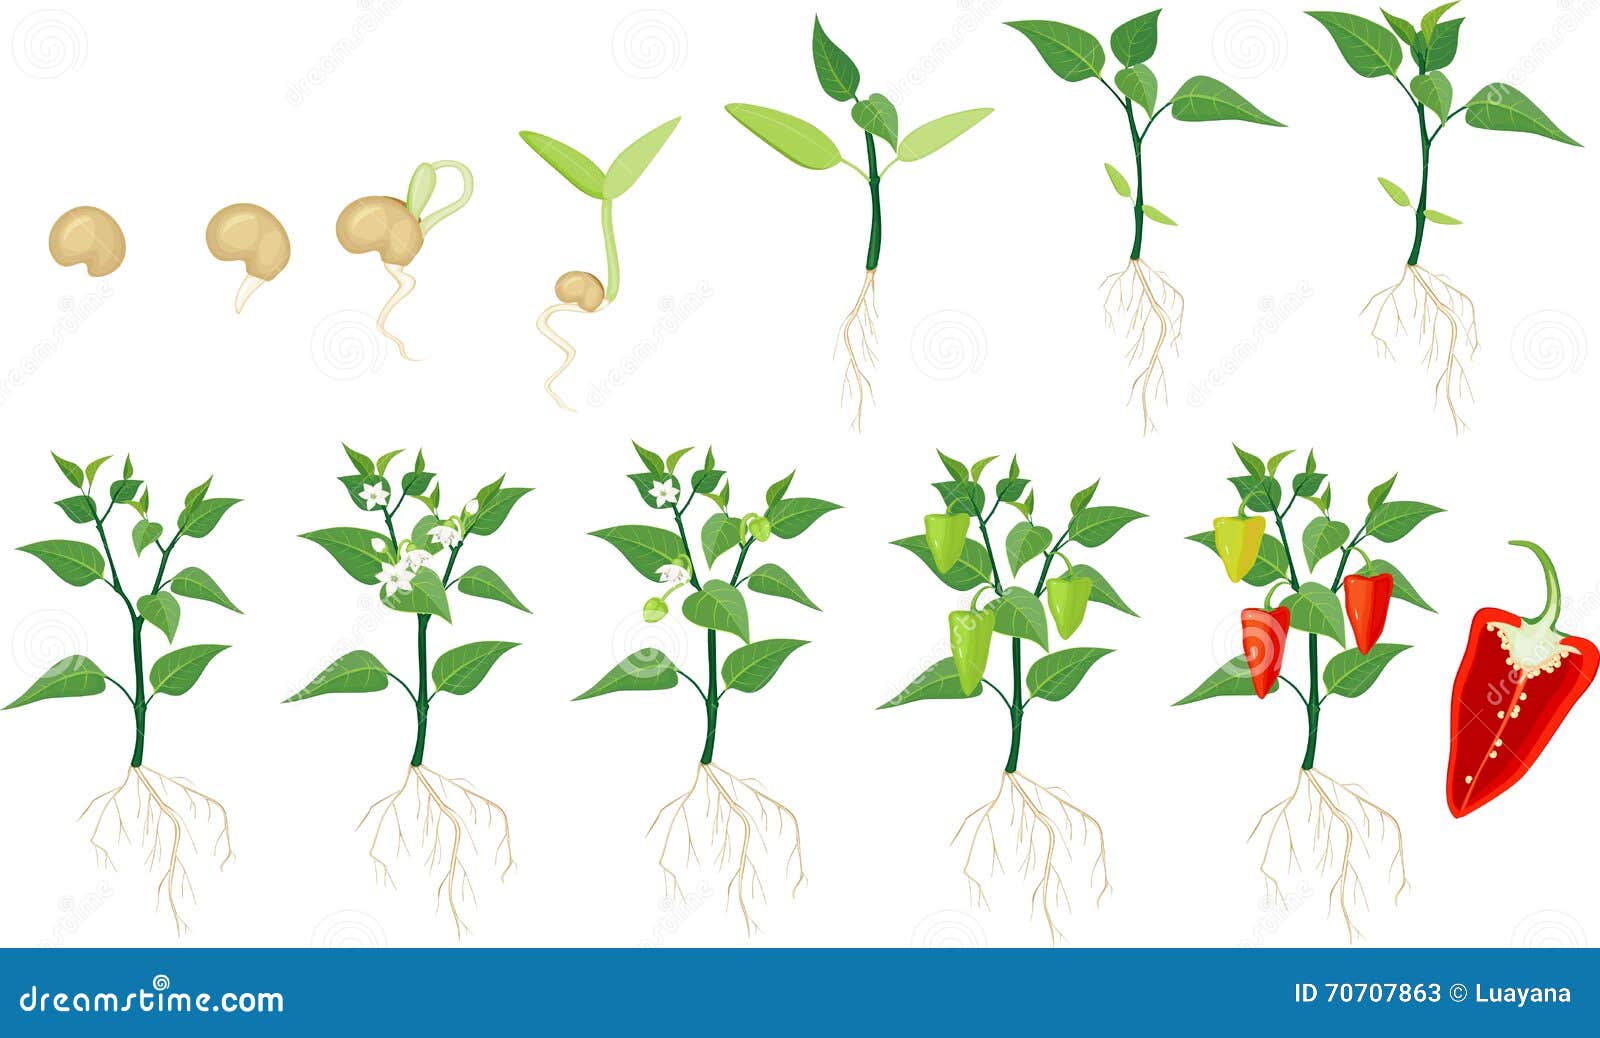 Tomato Plant Growth Stages